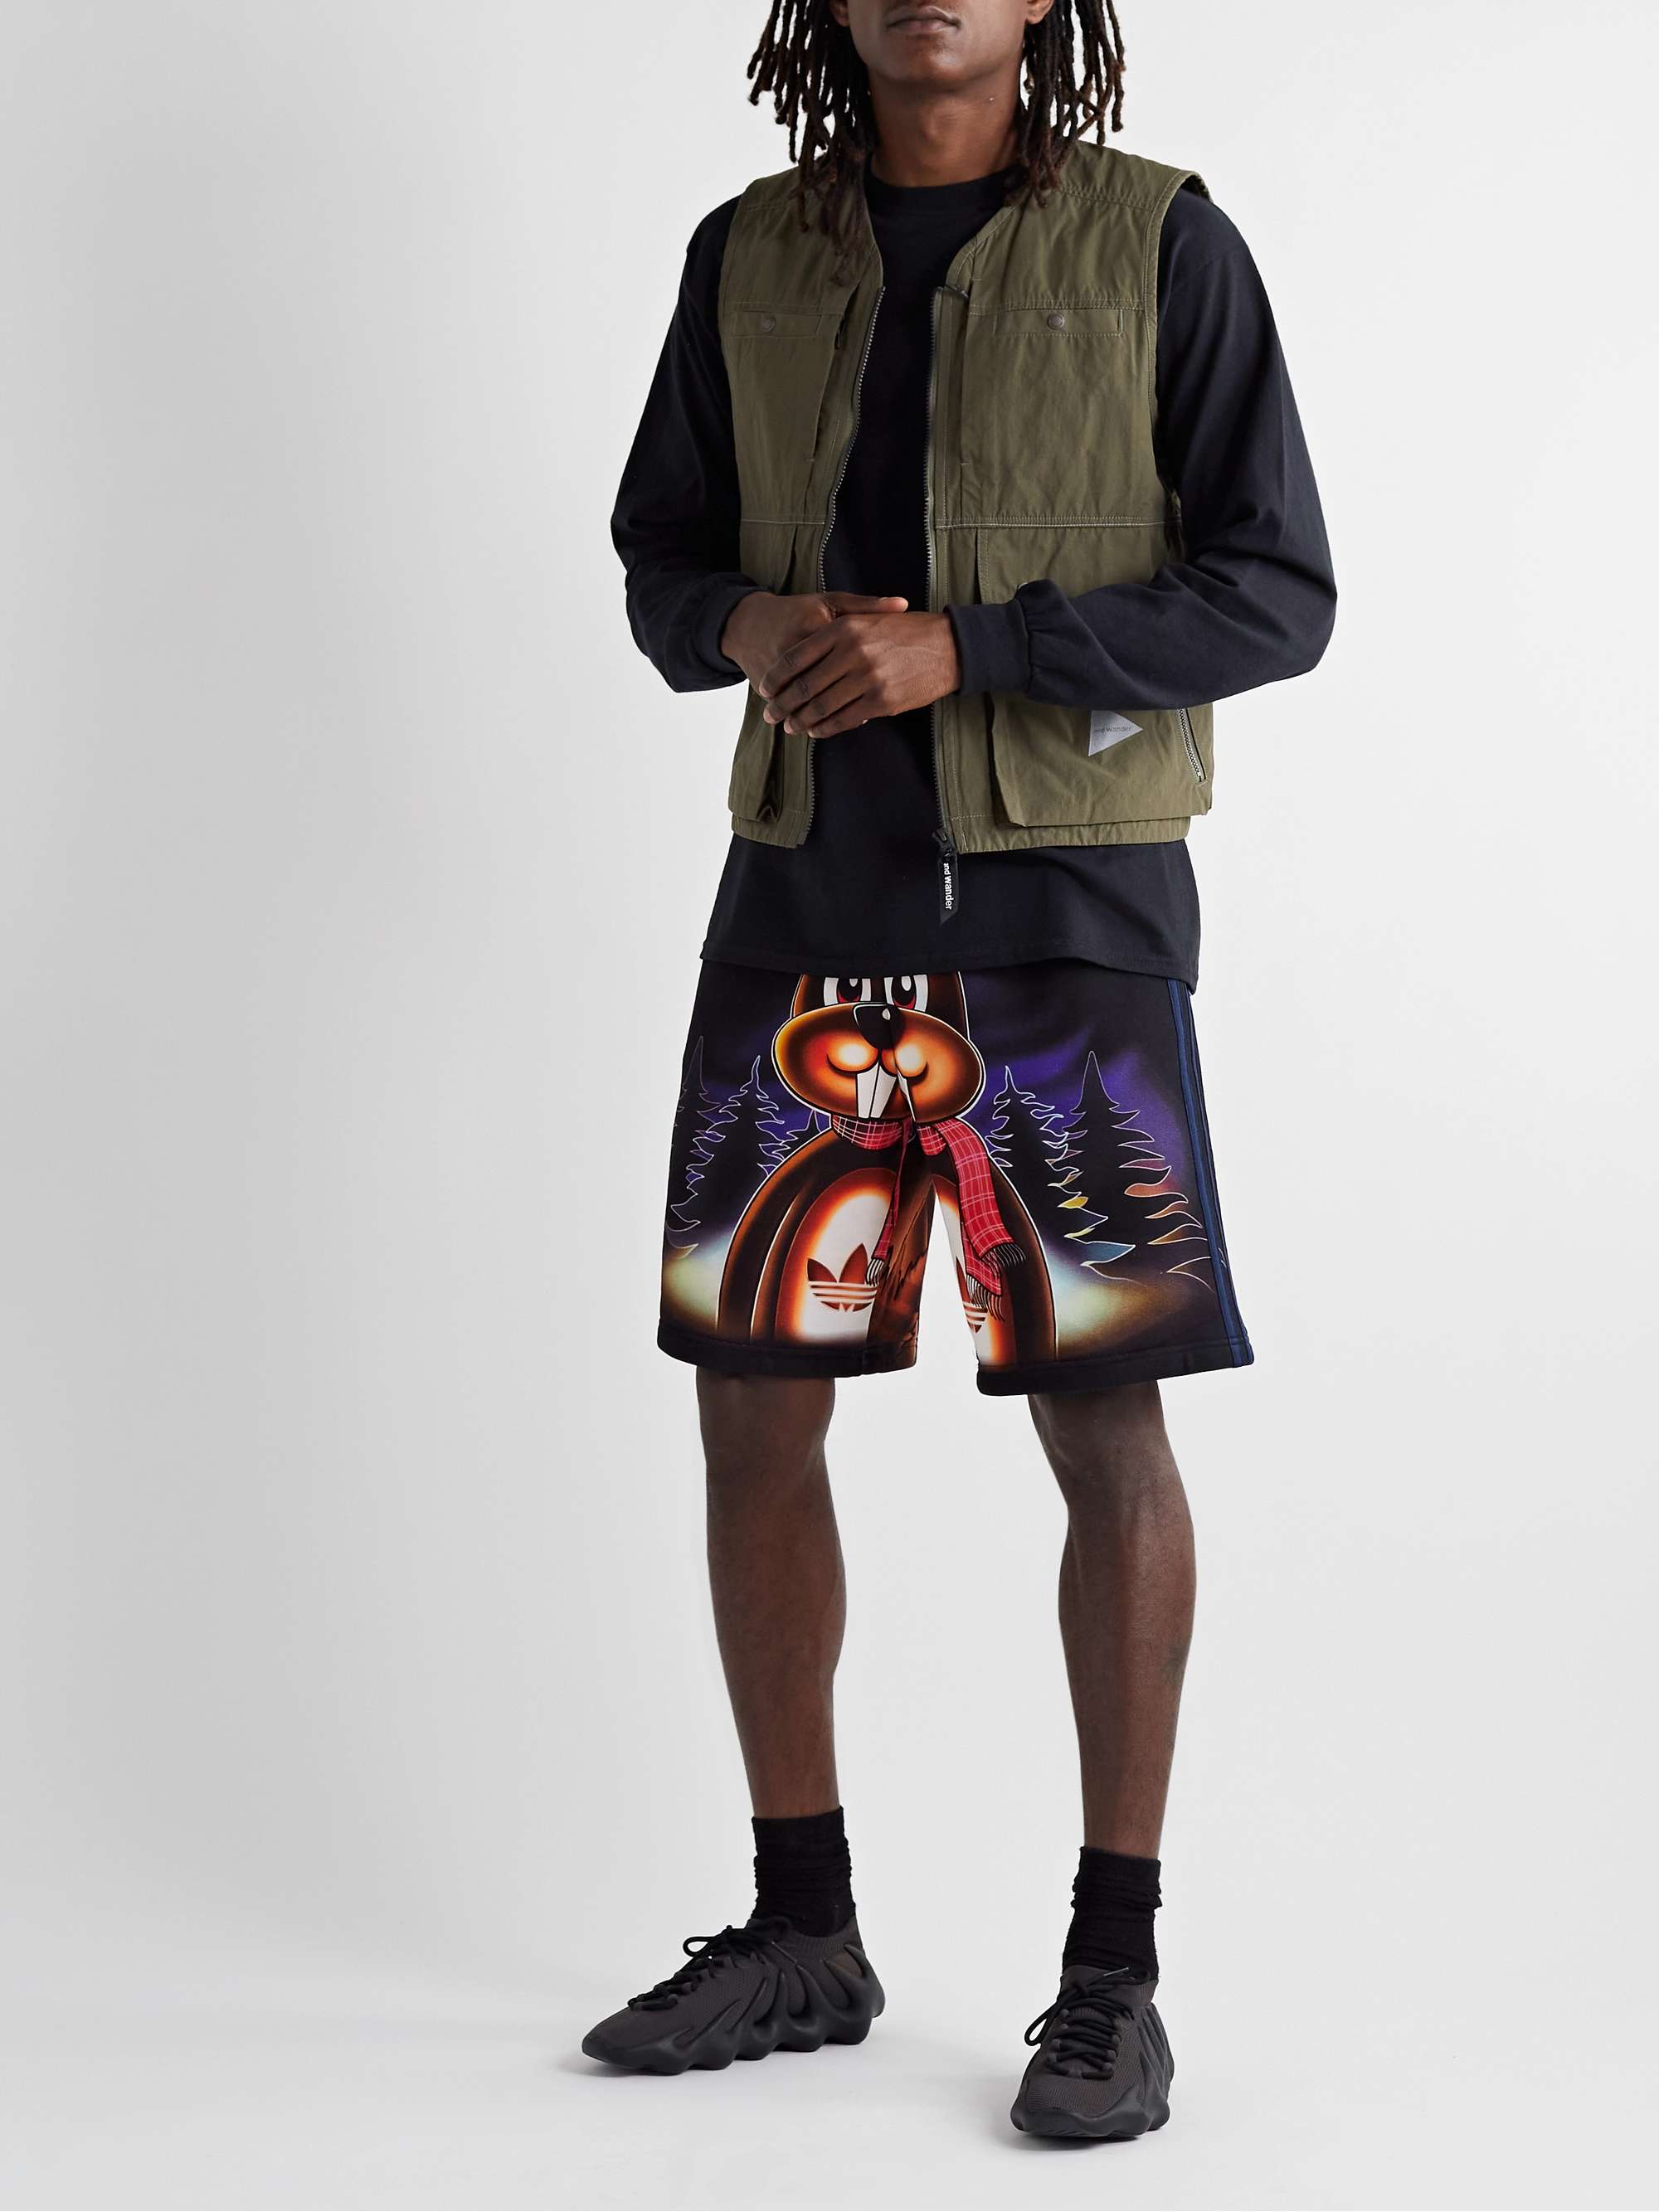 ADIDAS CONSORTIUM + Kerwin Frost Printed Cotton-Jersey Shorts